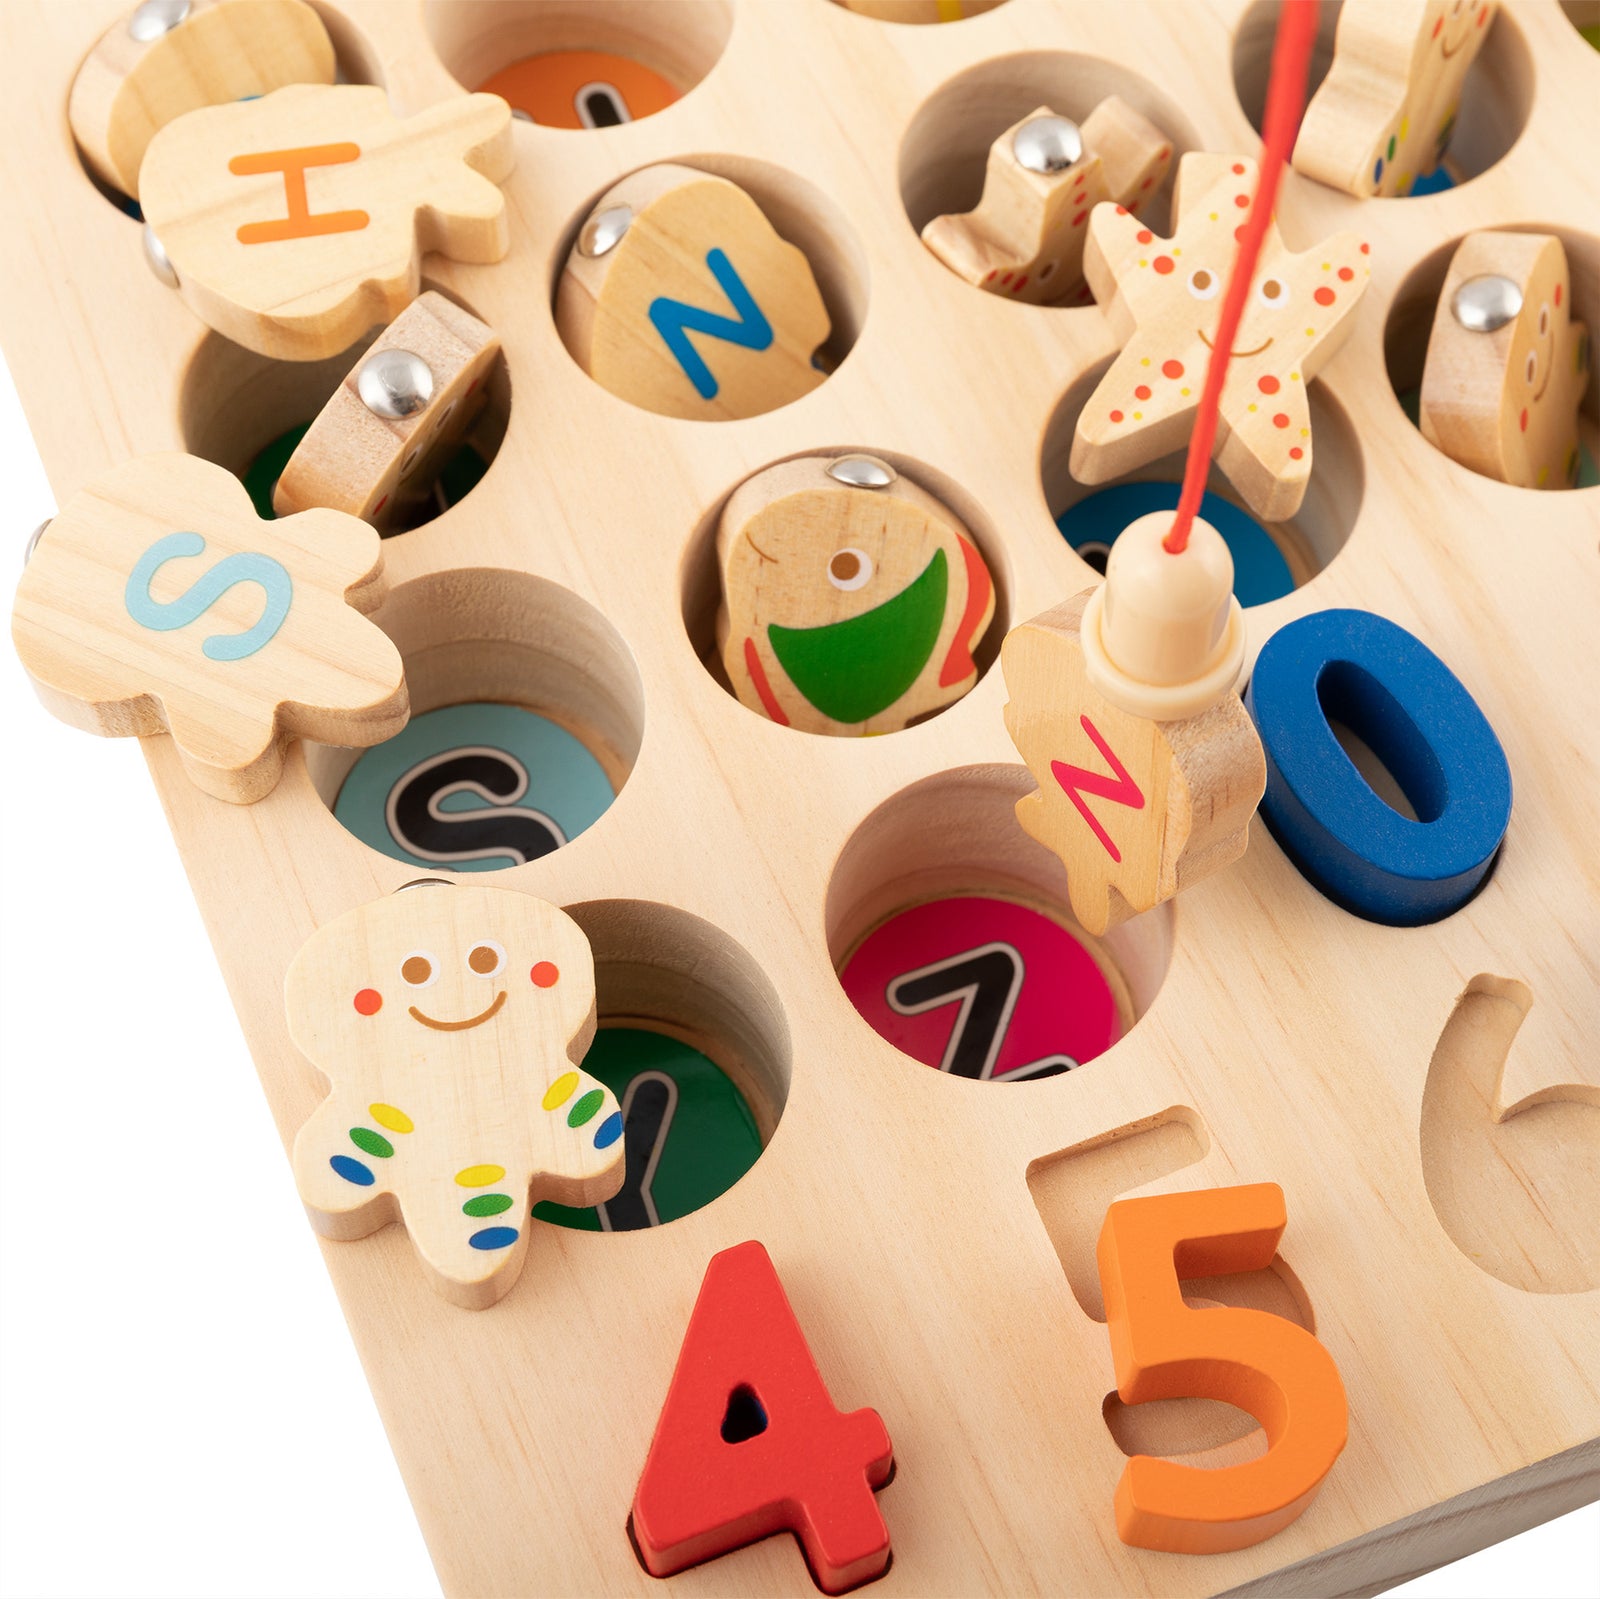 Magnetic Numbers Fishing Game, Maths Games